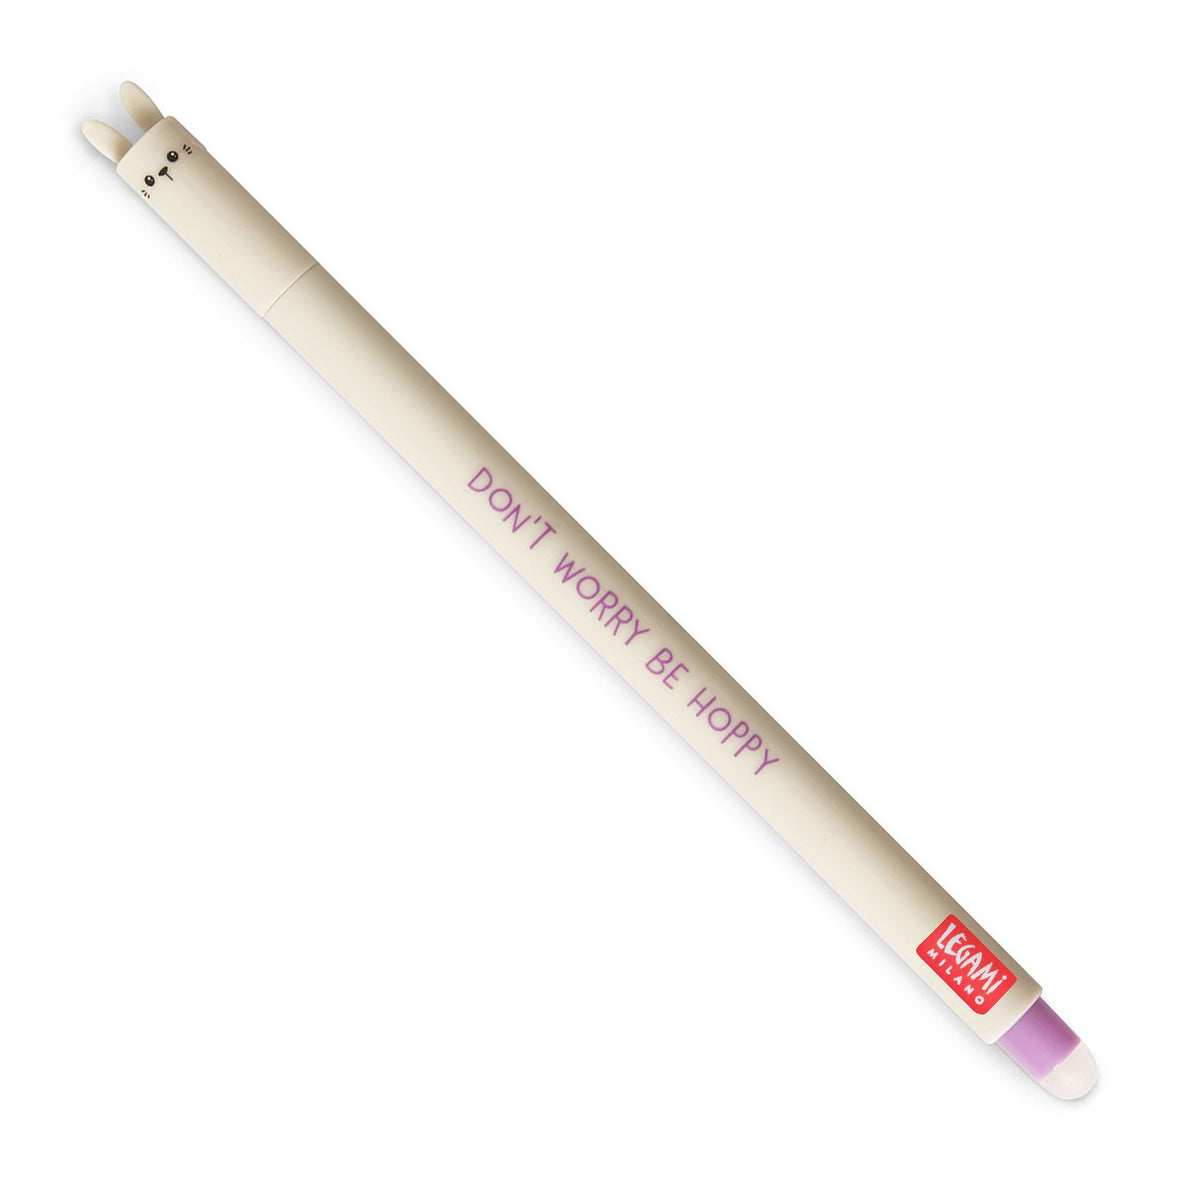 An image of a cream coloured erasable pen by Legami. The cap of the pen is like the head of a bunny with rabbit ears formed on the top. It has an erasble ball at the other end of the pen.